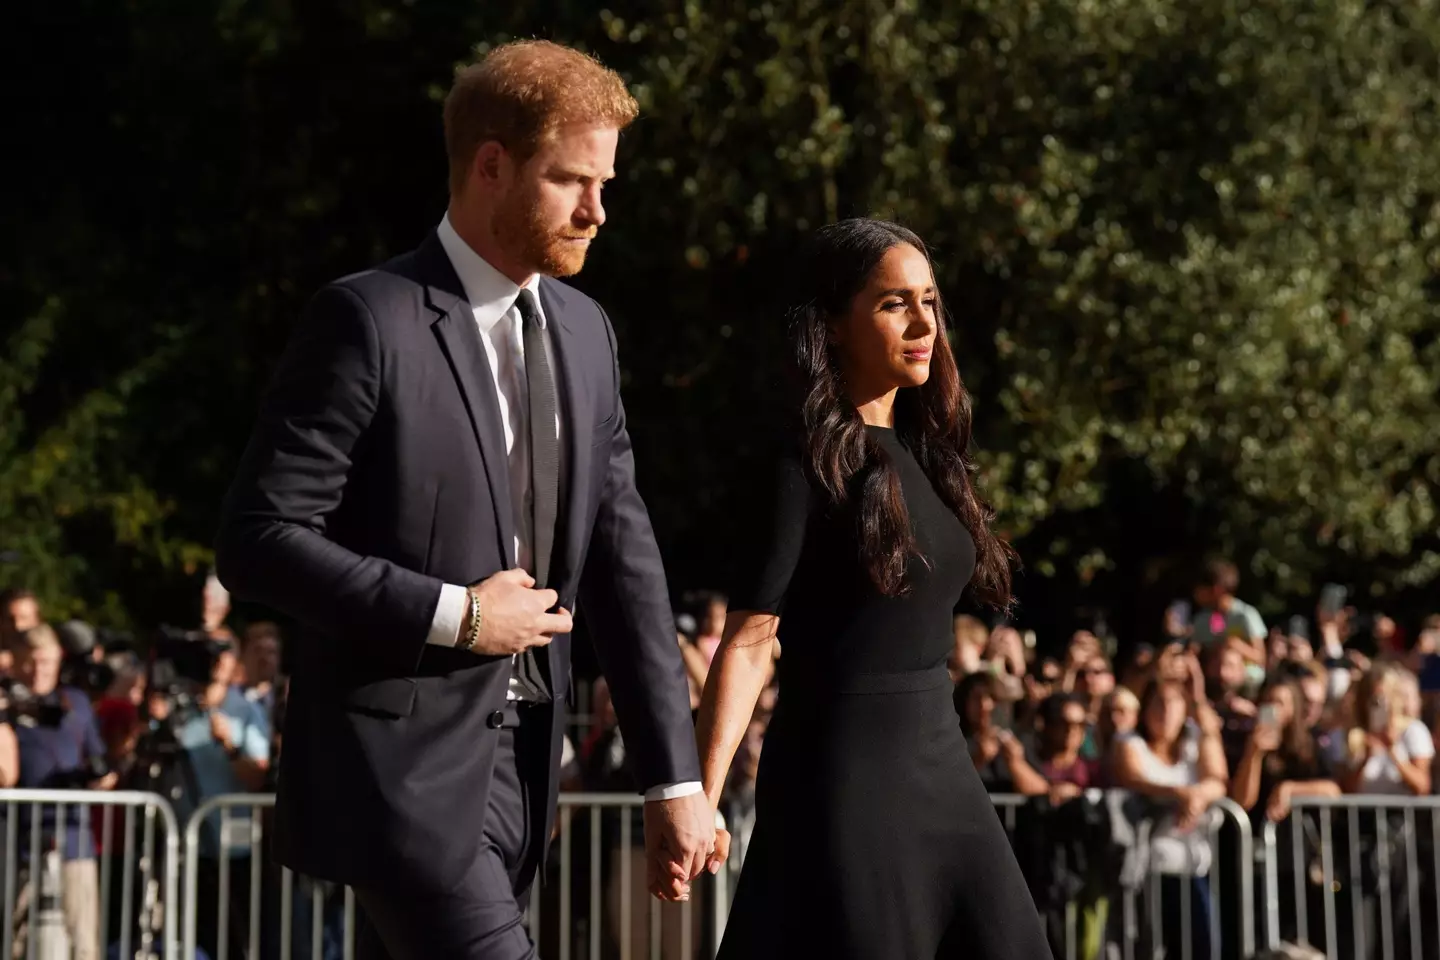 Prince Harry and Meghan Markle have released a statement following the death of Queen Elizabeth II.